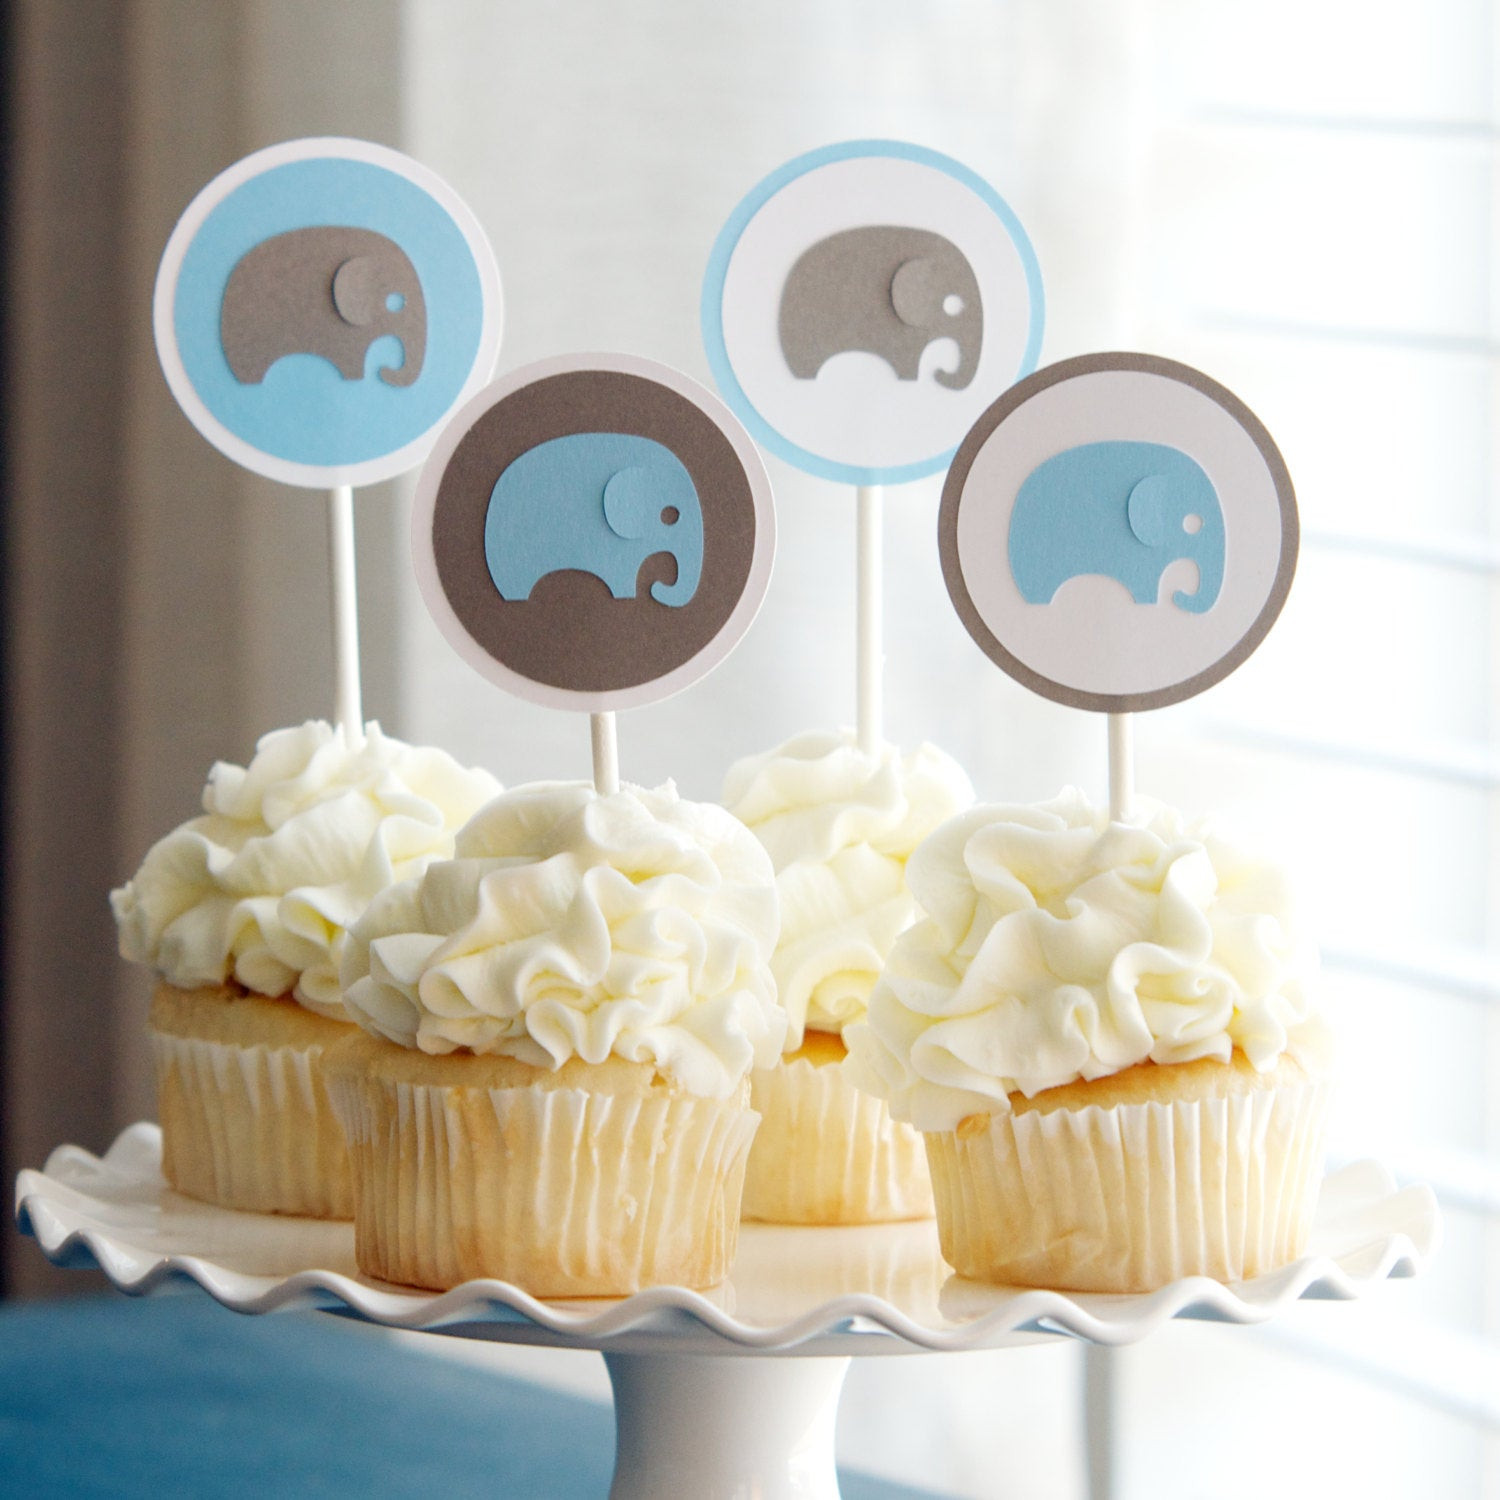 Elephant Baby Shower Cupcakes
 Baby Shower Decoration Boy Elephant Cupcake by sparkanddelight